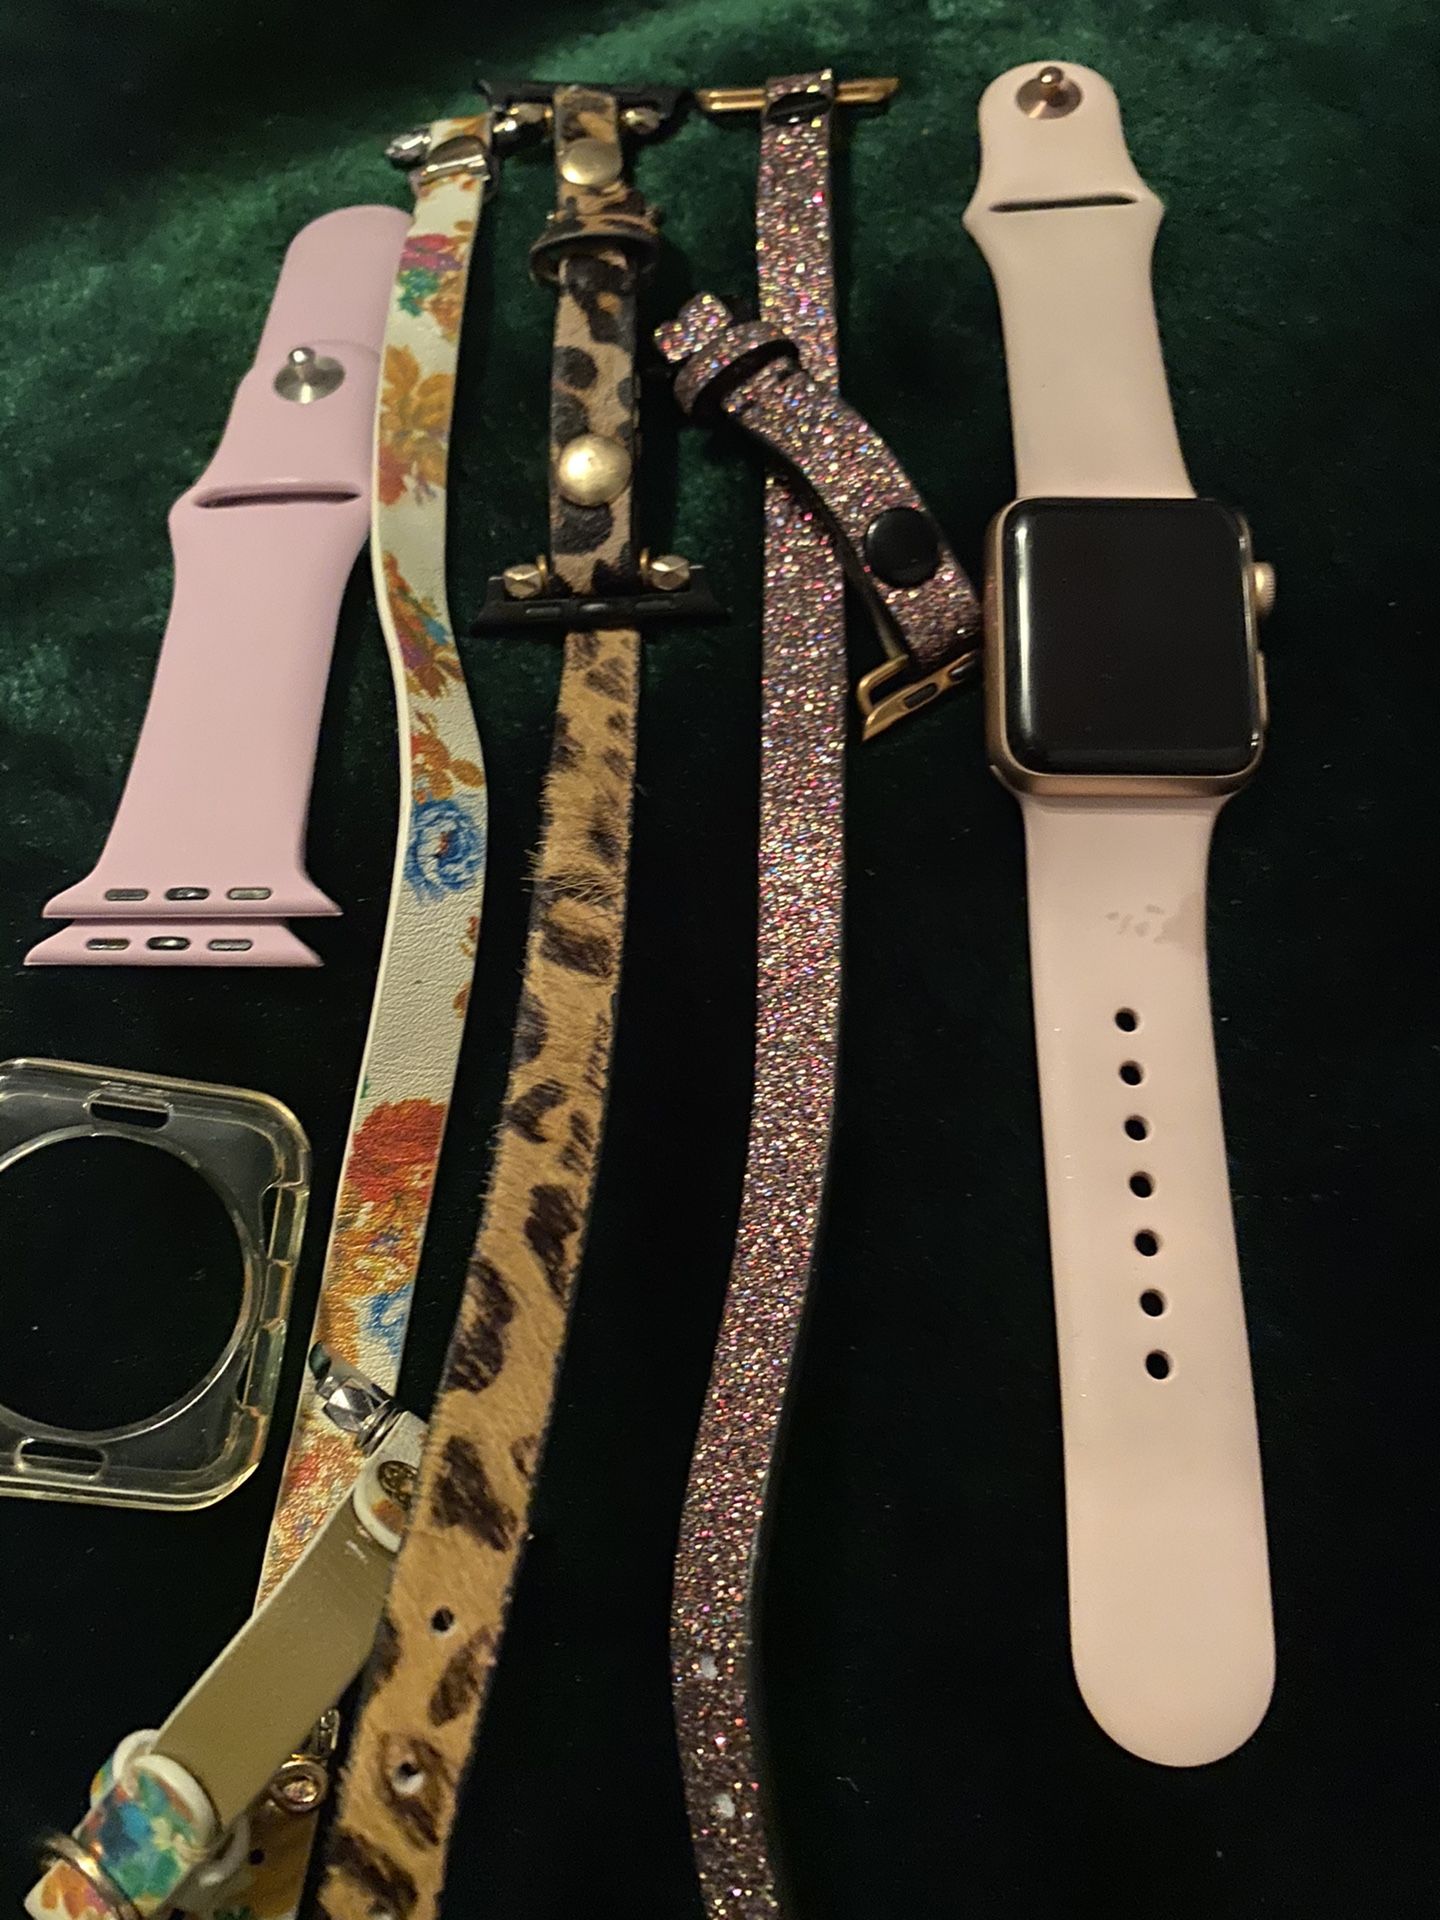 Apple Watch with bands